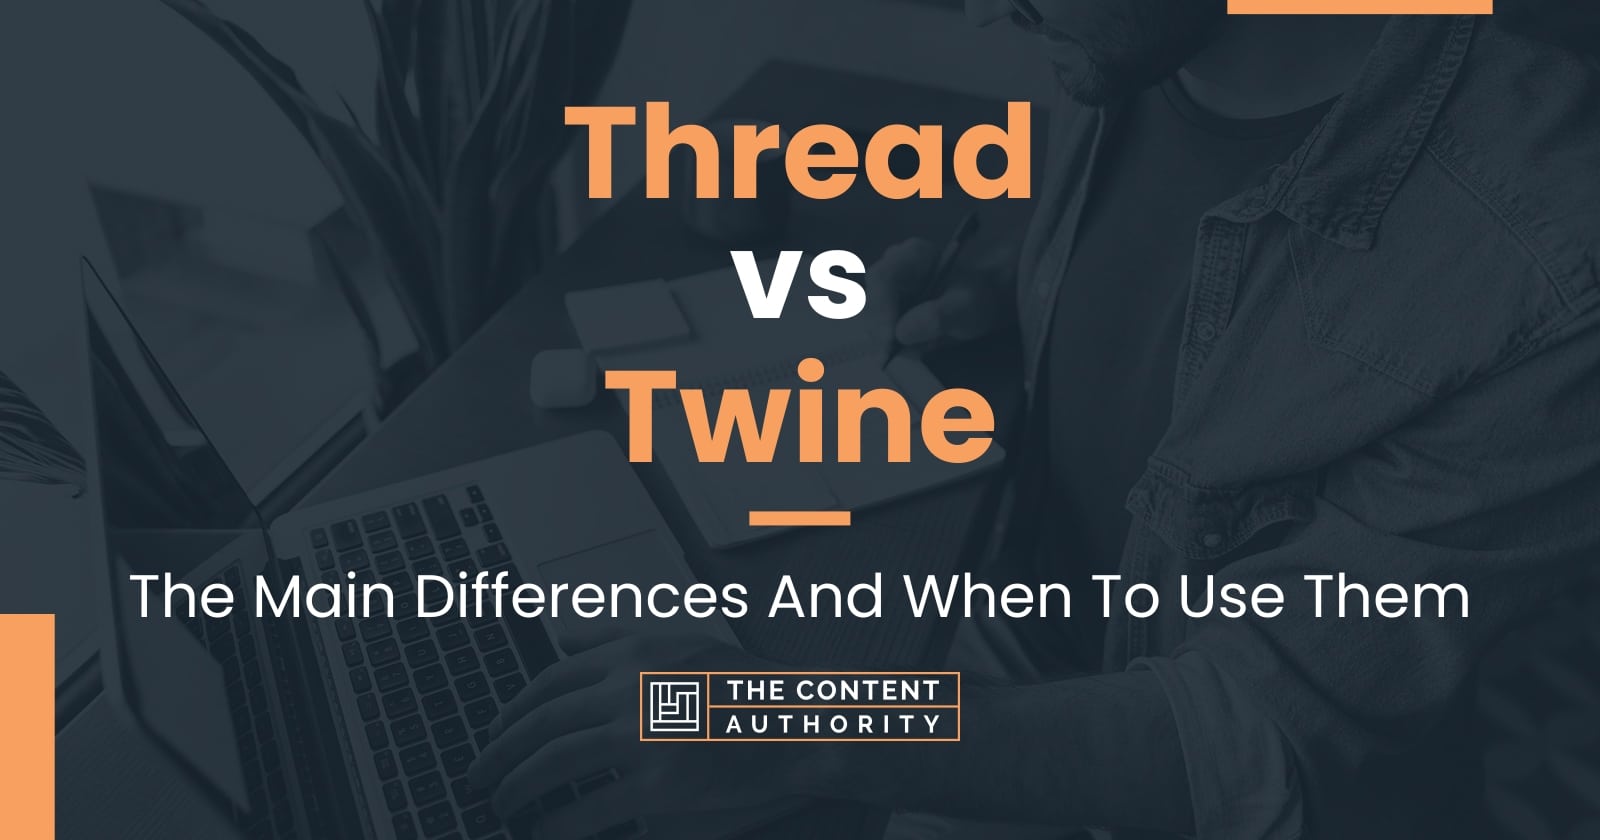 Thread vs Twine: The Main Differences And When To Use Them